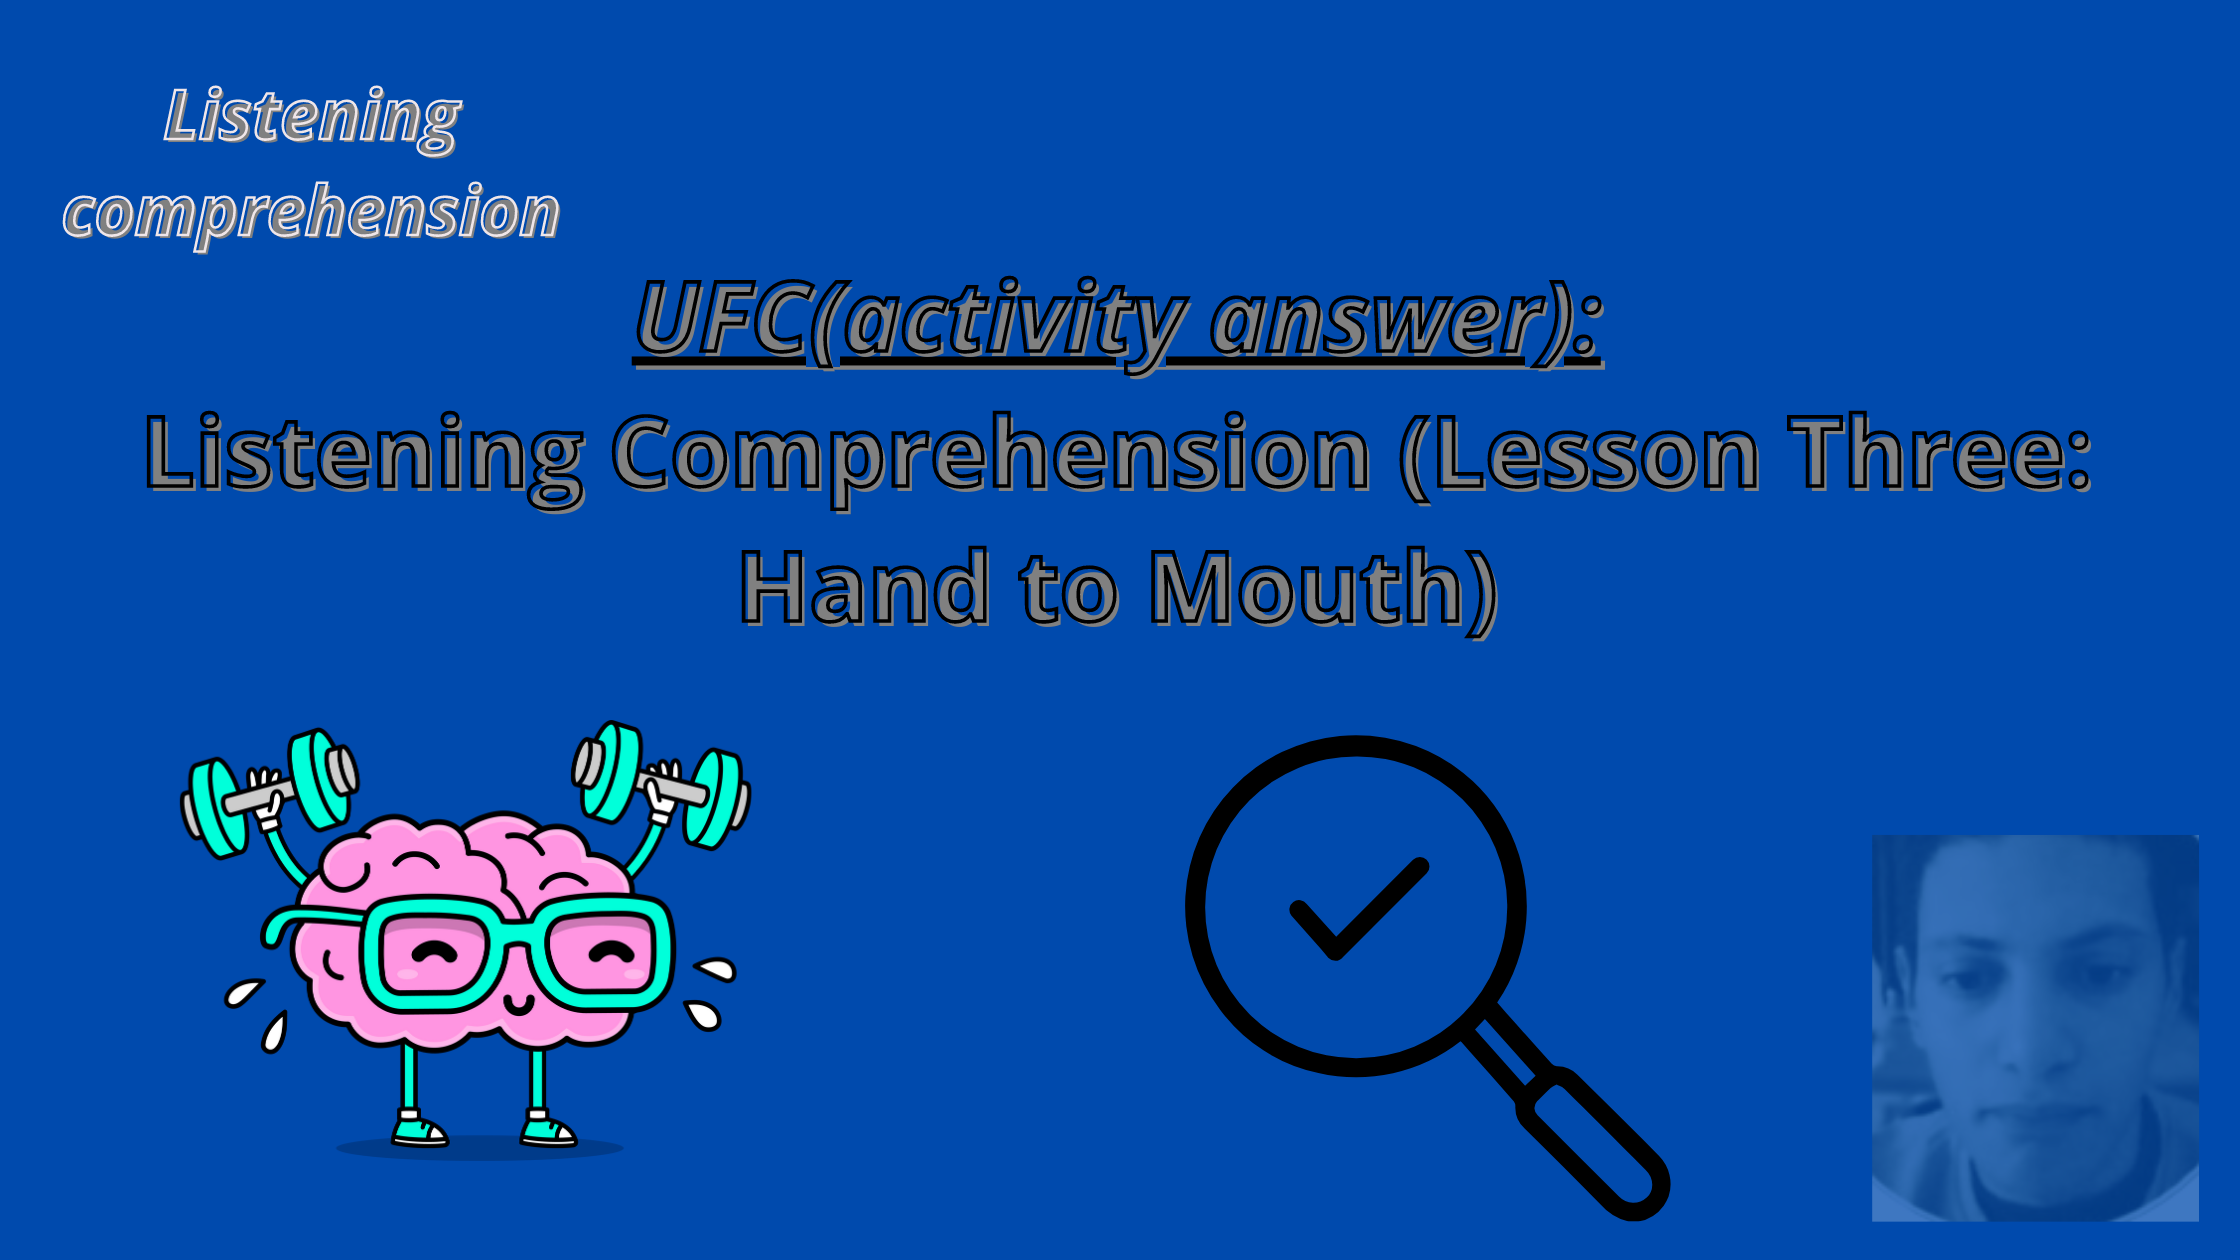 Listening Comprehension (Lesson Three: Hand to Mouth)